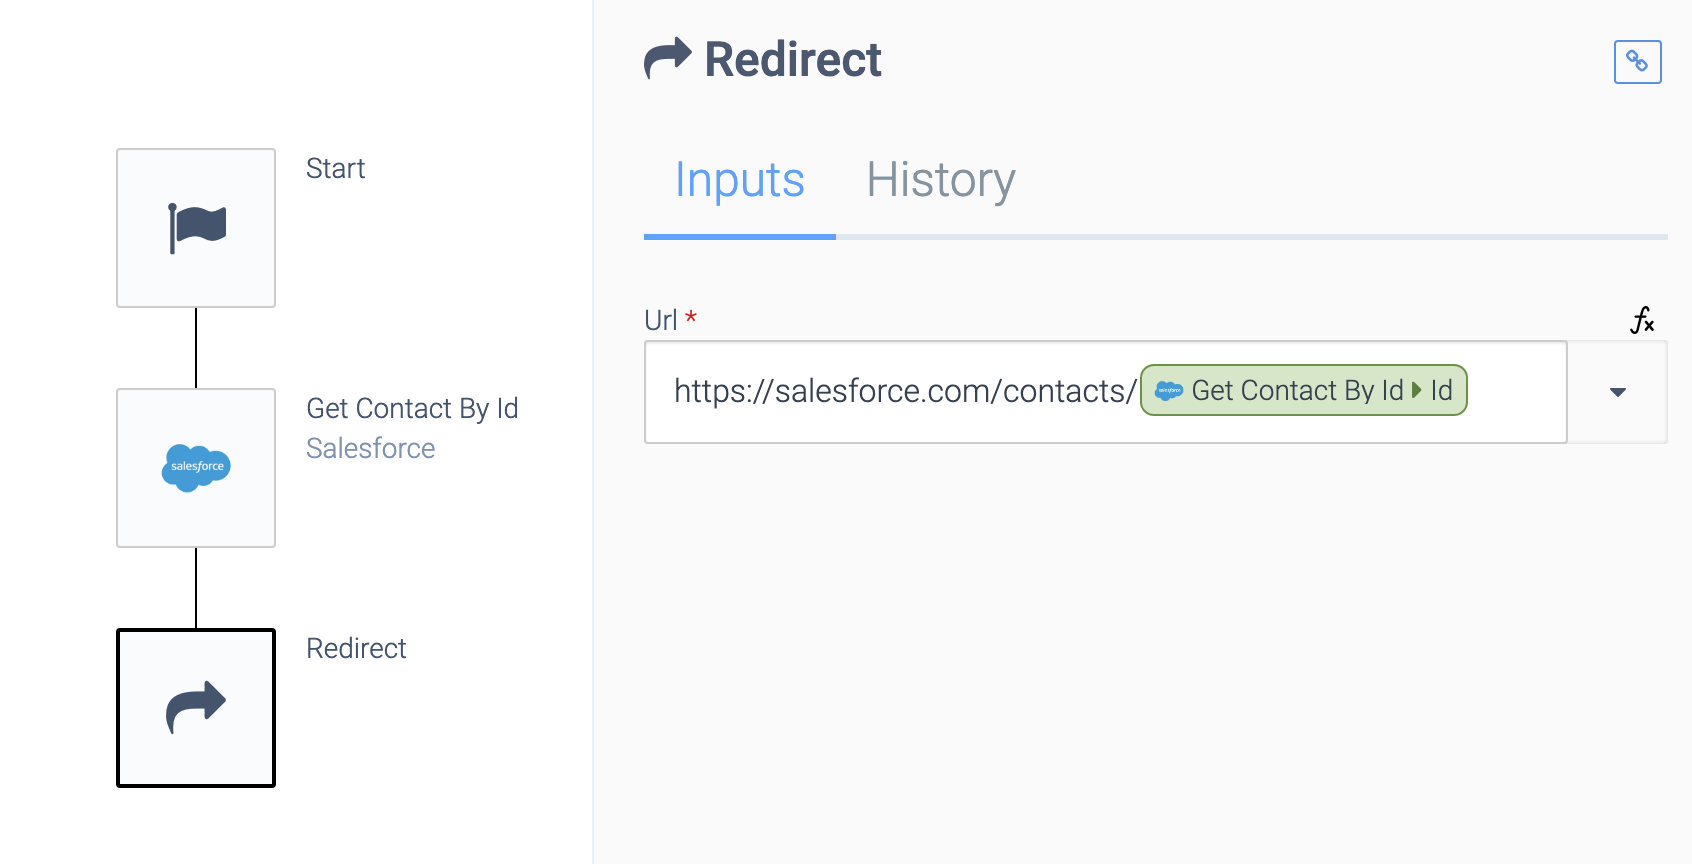 an automation consisting of a Start block, a Get Contact By Id block, and a Redirect block. The Redirect block is selected. The Url field is filled with a sample Url that is completed by data from the Get Contact By Id block.